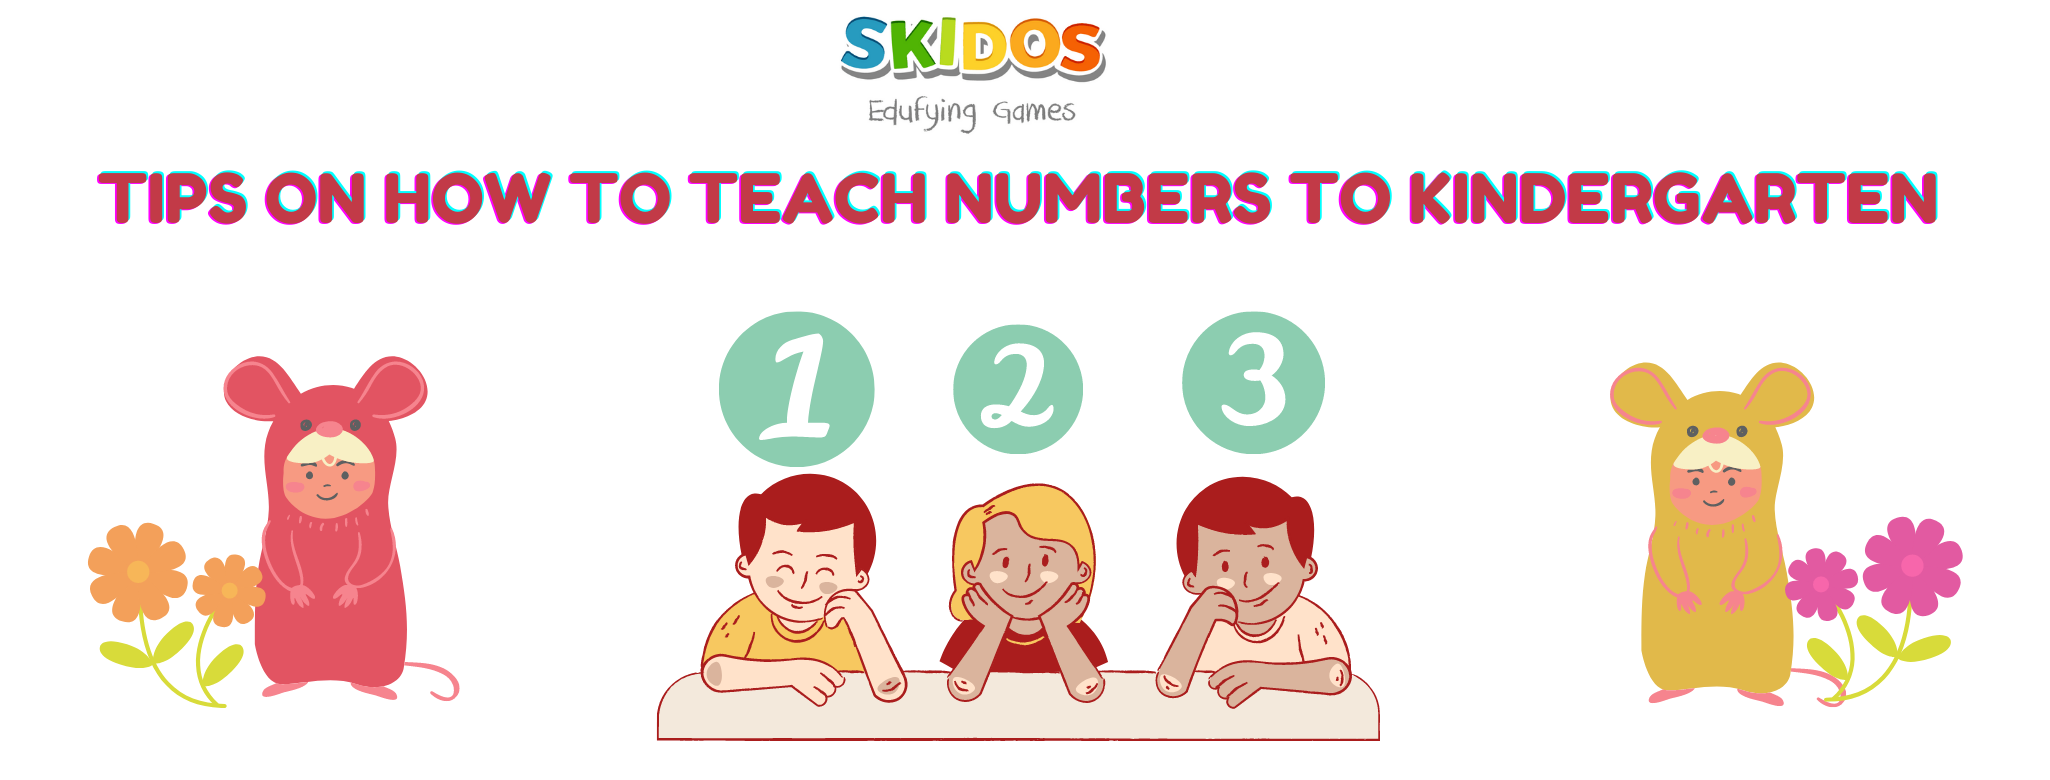 10 Tips On How To Teach Numbers To Kindergarten Updated SKIDOS